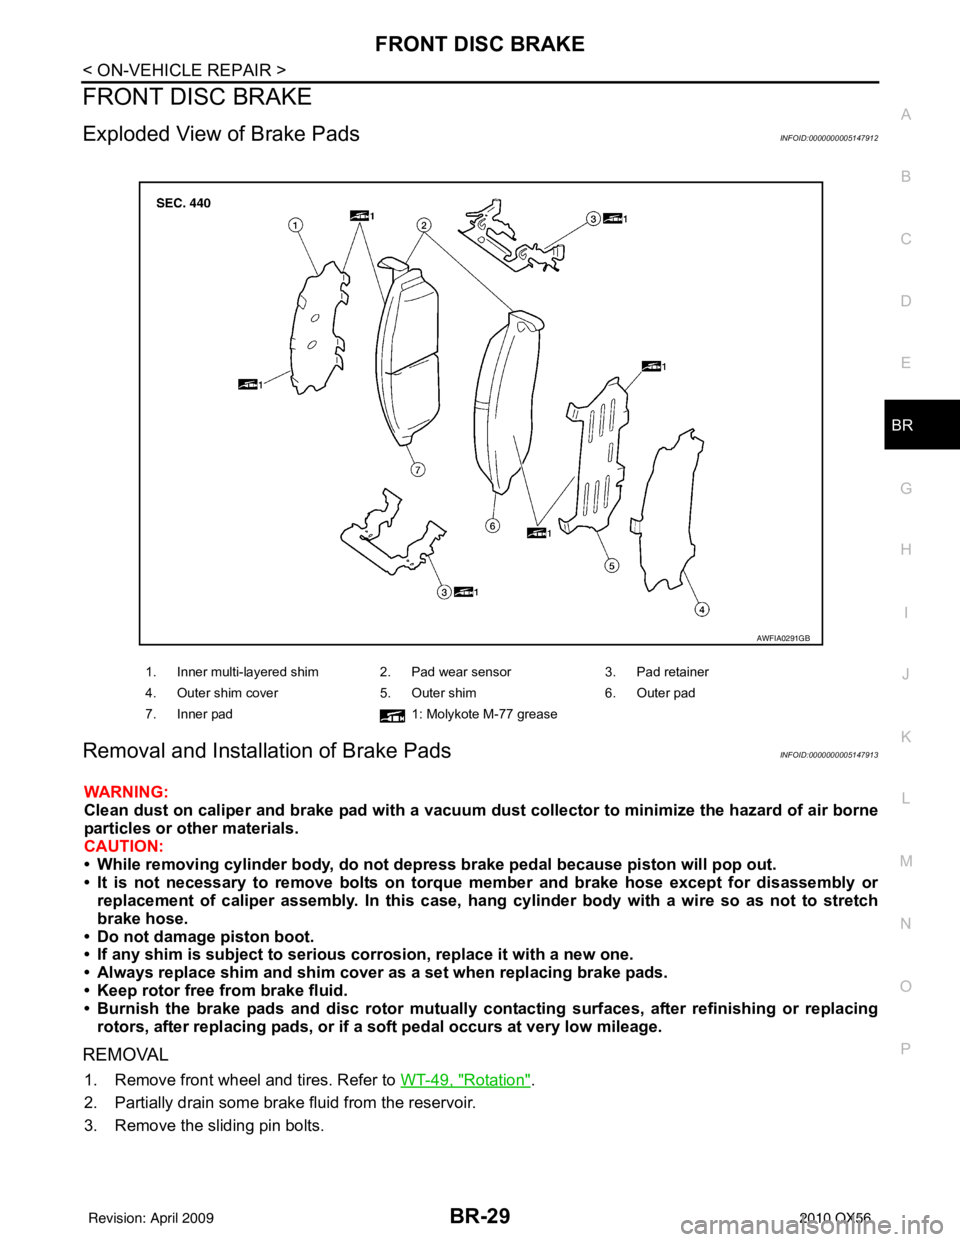 INFINITI QX56 2010  Factory Service Manual FRONT DISC BRAKEBR-29
< ON-VEHICLE REPAIR >
C
DE
G H
I
J
K L
M A
B
BR
N
O P
FRONT DISC BRAKE
Exploded View of Brake PadsINFOID:0000000005147912
Removal and Installation of Brake PadsINFOID:00000000051